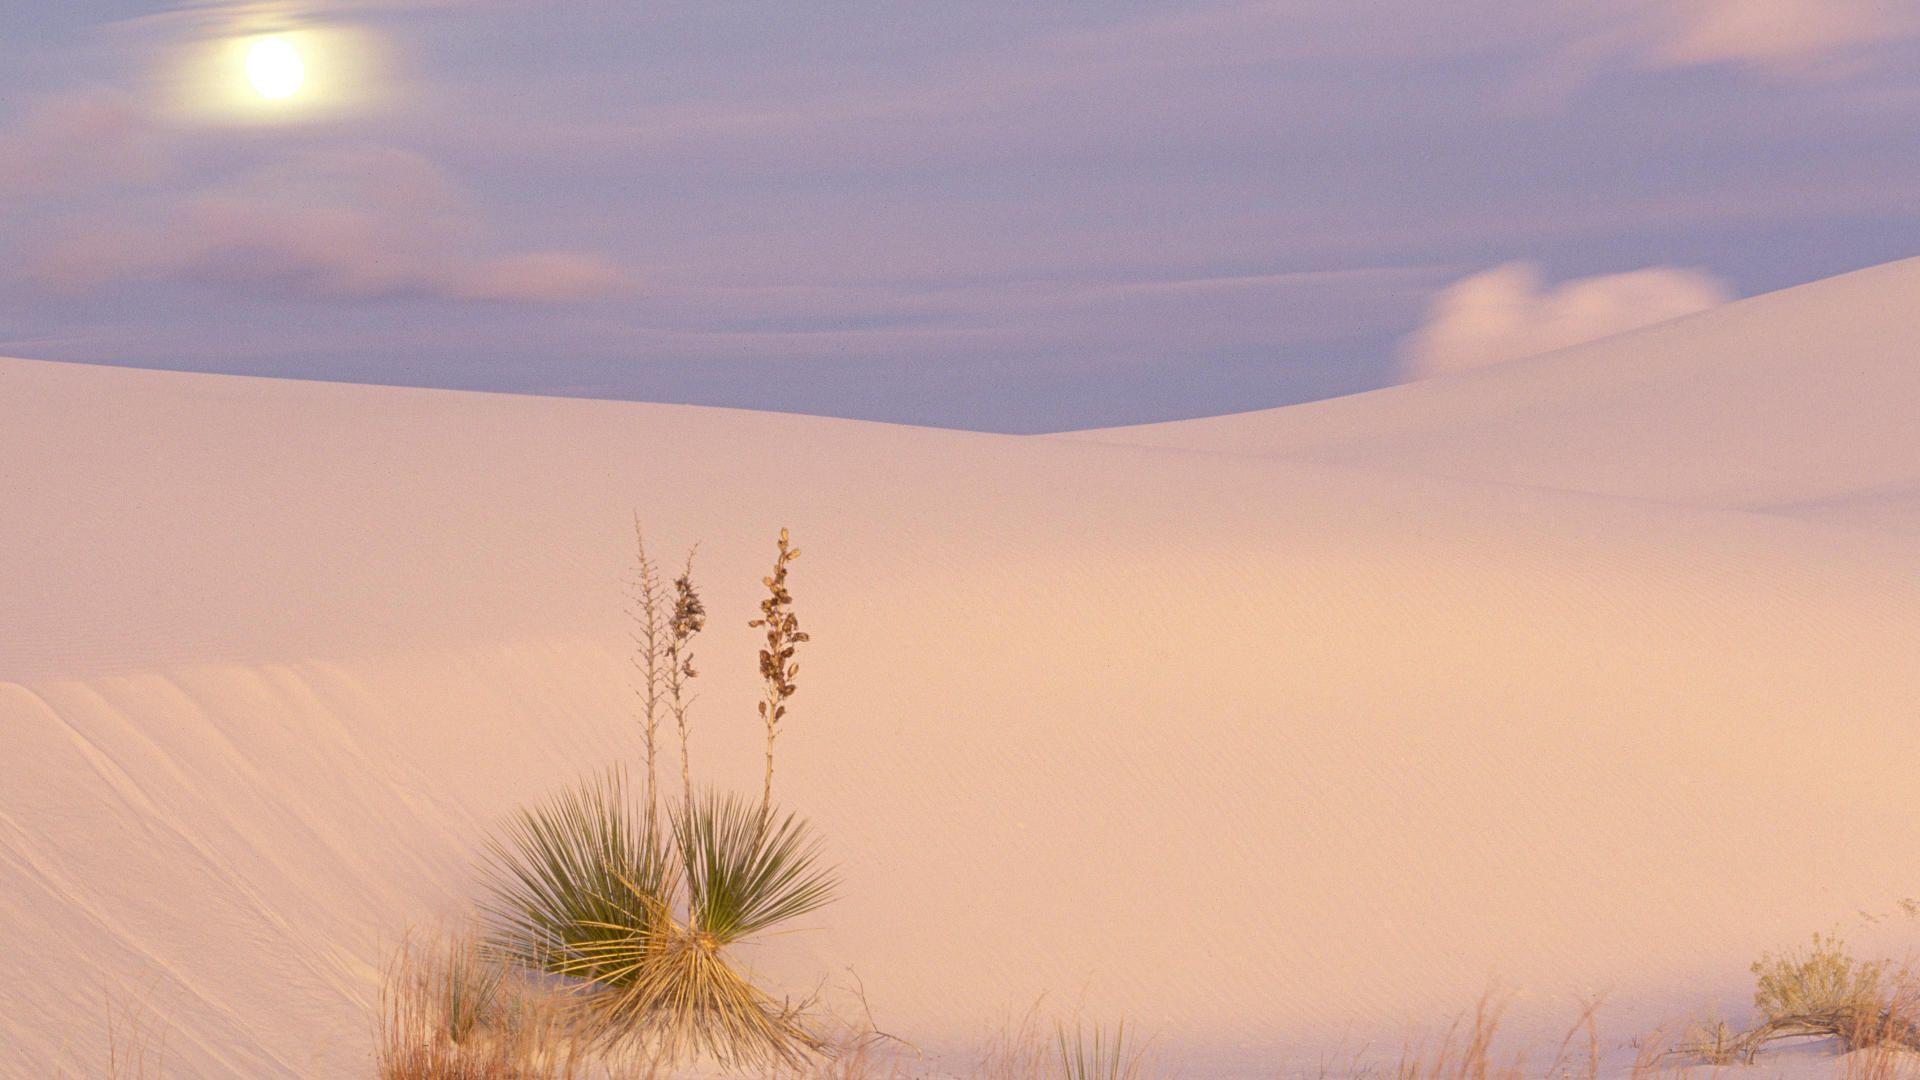 Full Moon Over Dunes, White Sands National Monument, New Mexico